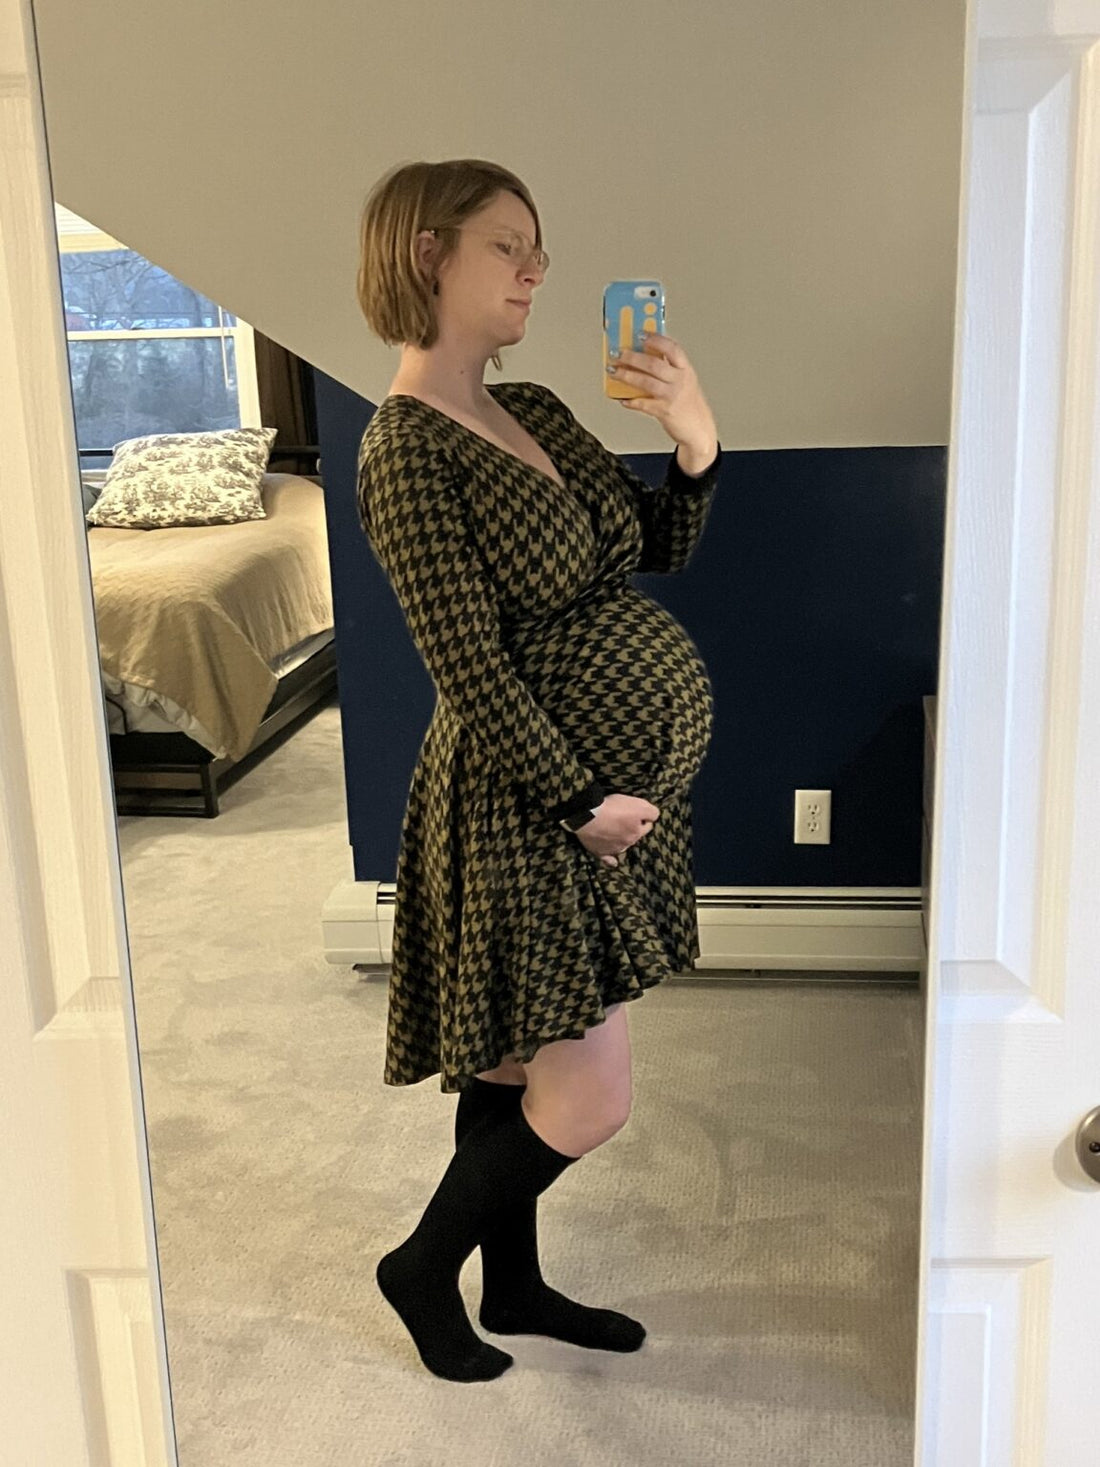 Off the Rack ~ The Full-Bust Maternity Clothing Landscape STINKS